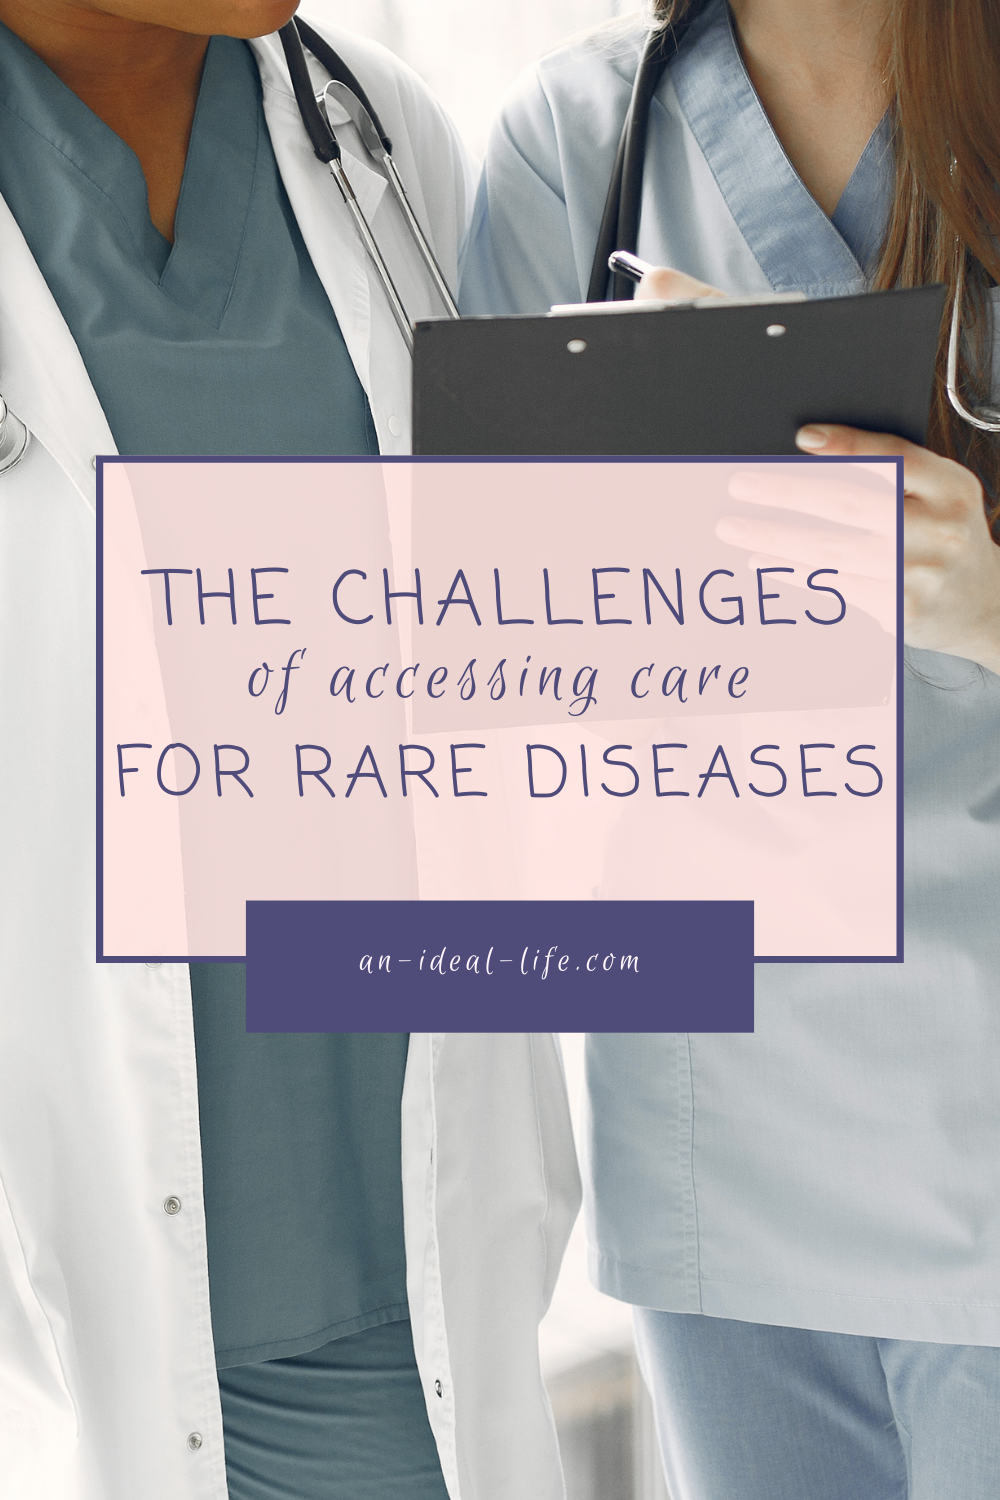 The Challenges of Accessing Care for Rare Diseases